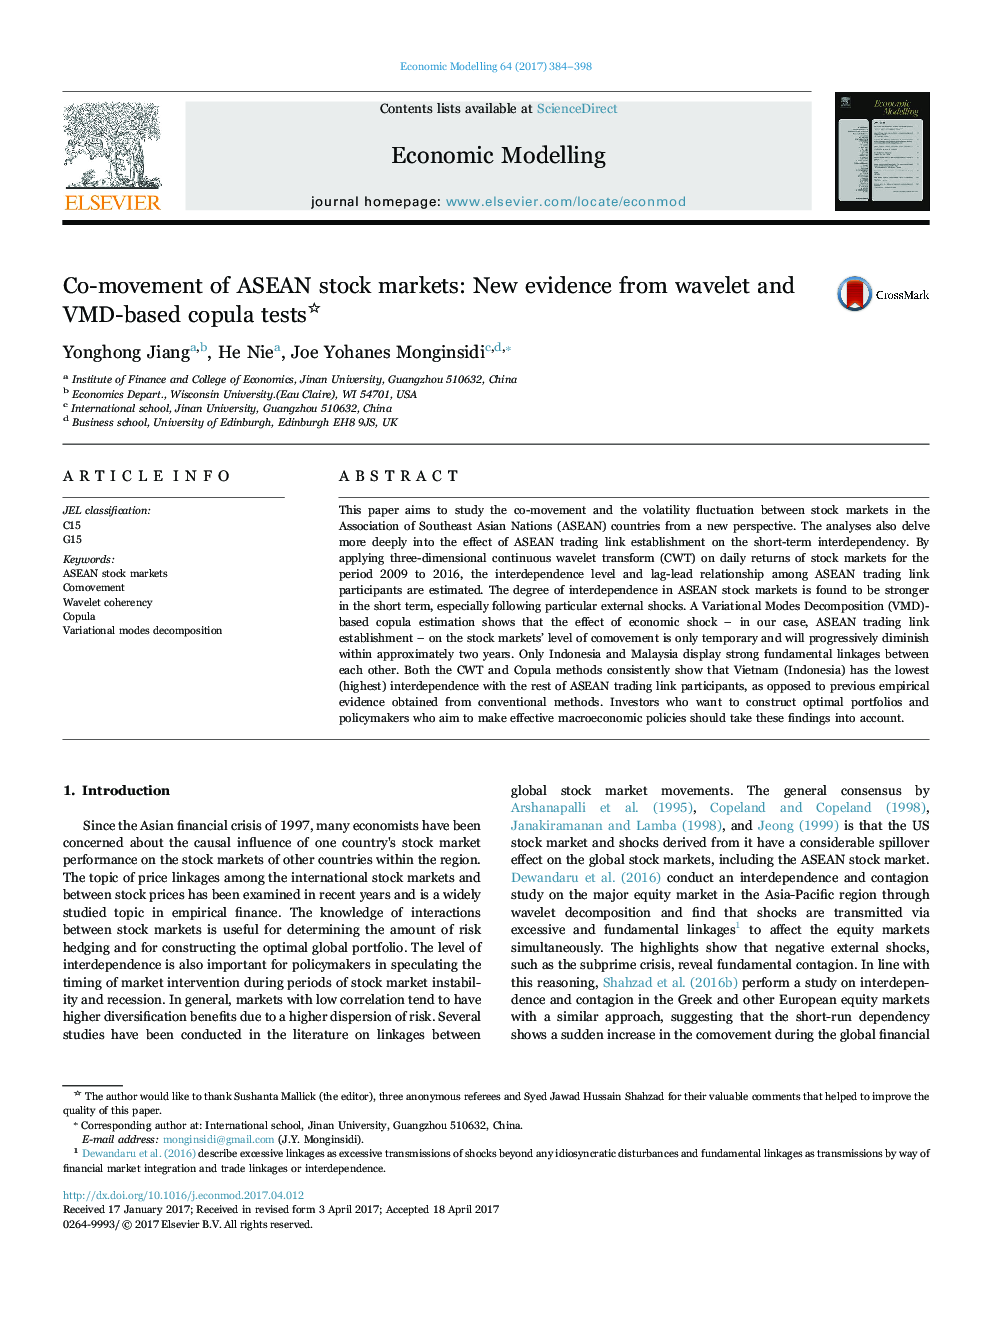 Co-movement of ASEAN stock markets: New evidence from wavelet and VMD-based copula tests